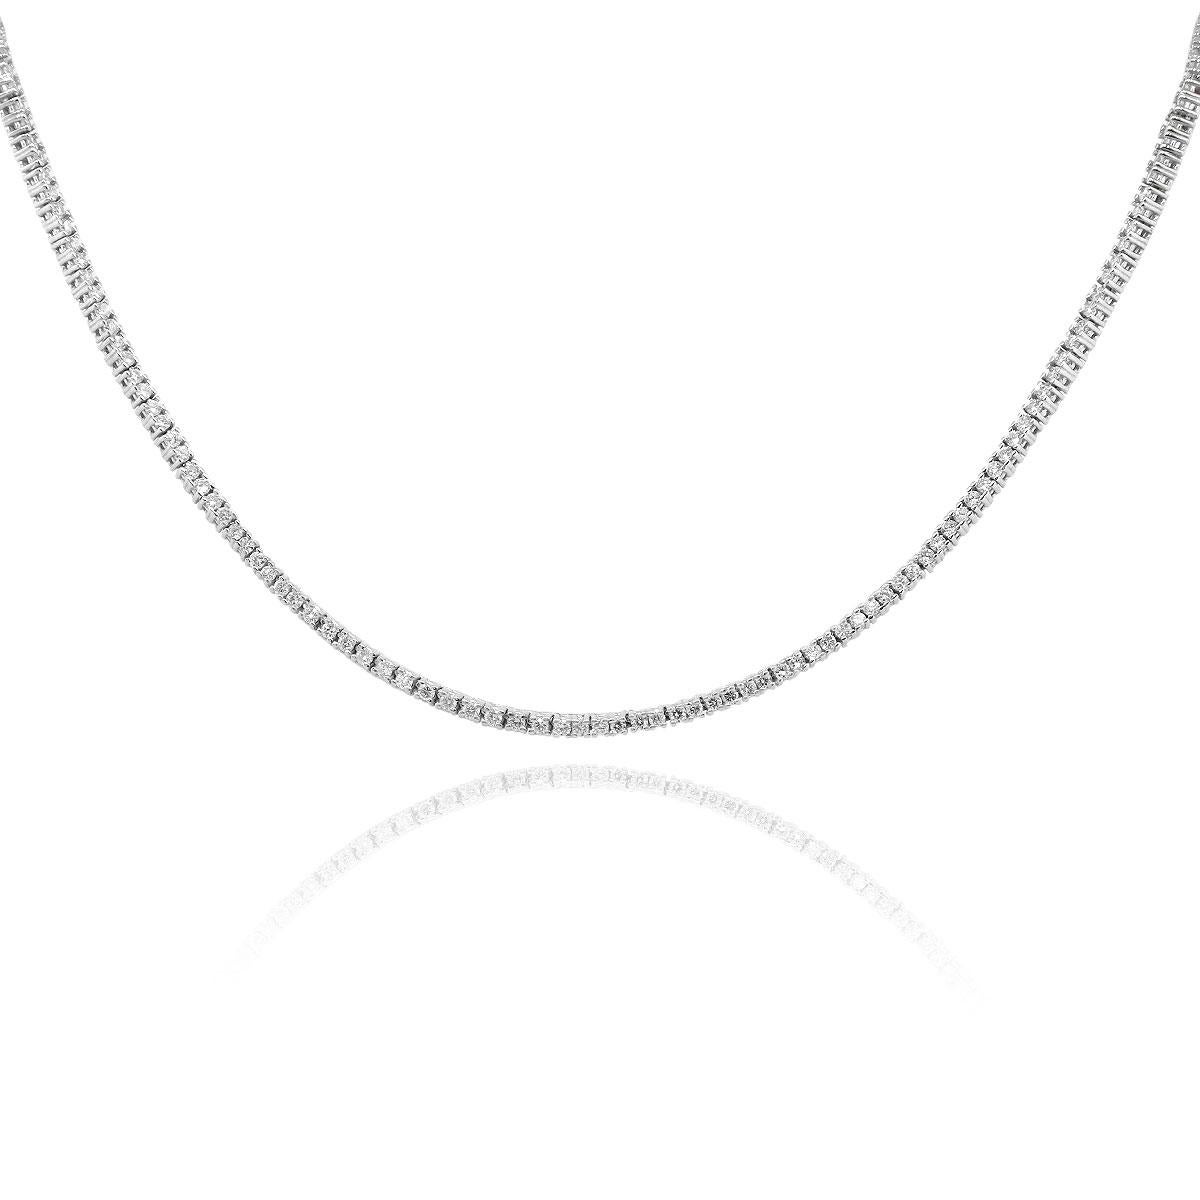 Material: 18k White Gold
Diamond Details: Approx. 5.26ctw of round cut diamonds. Diamonds are G/H in color and VS in clarity
Measurements: Necklace measures 19